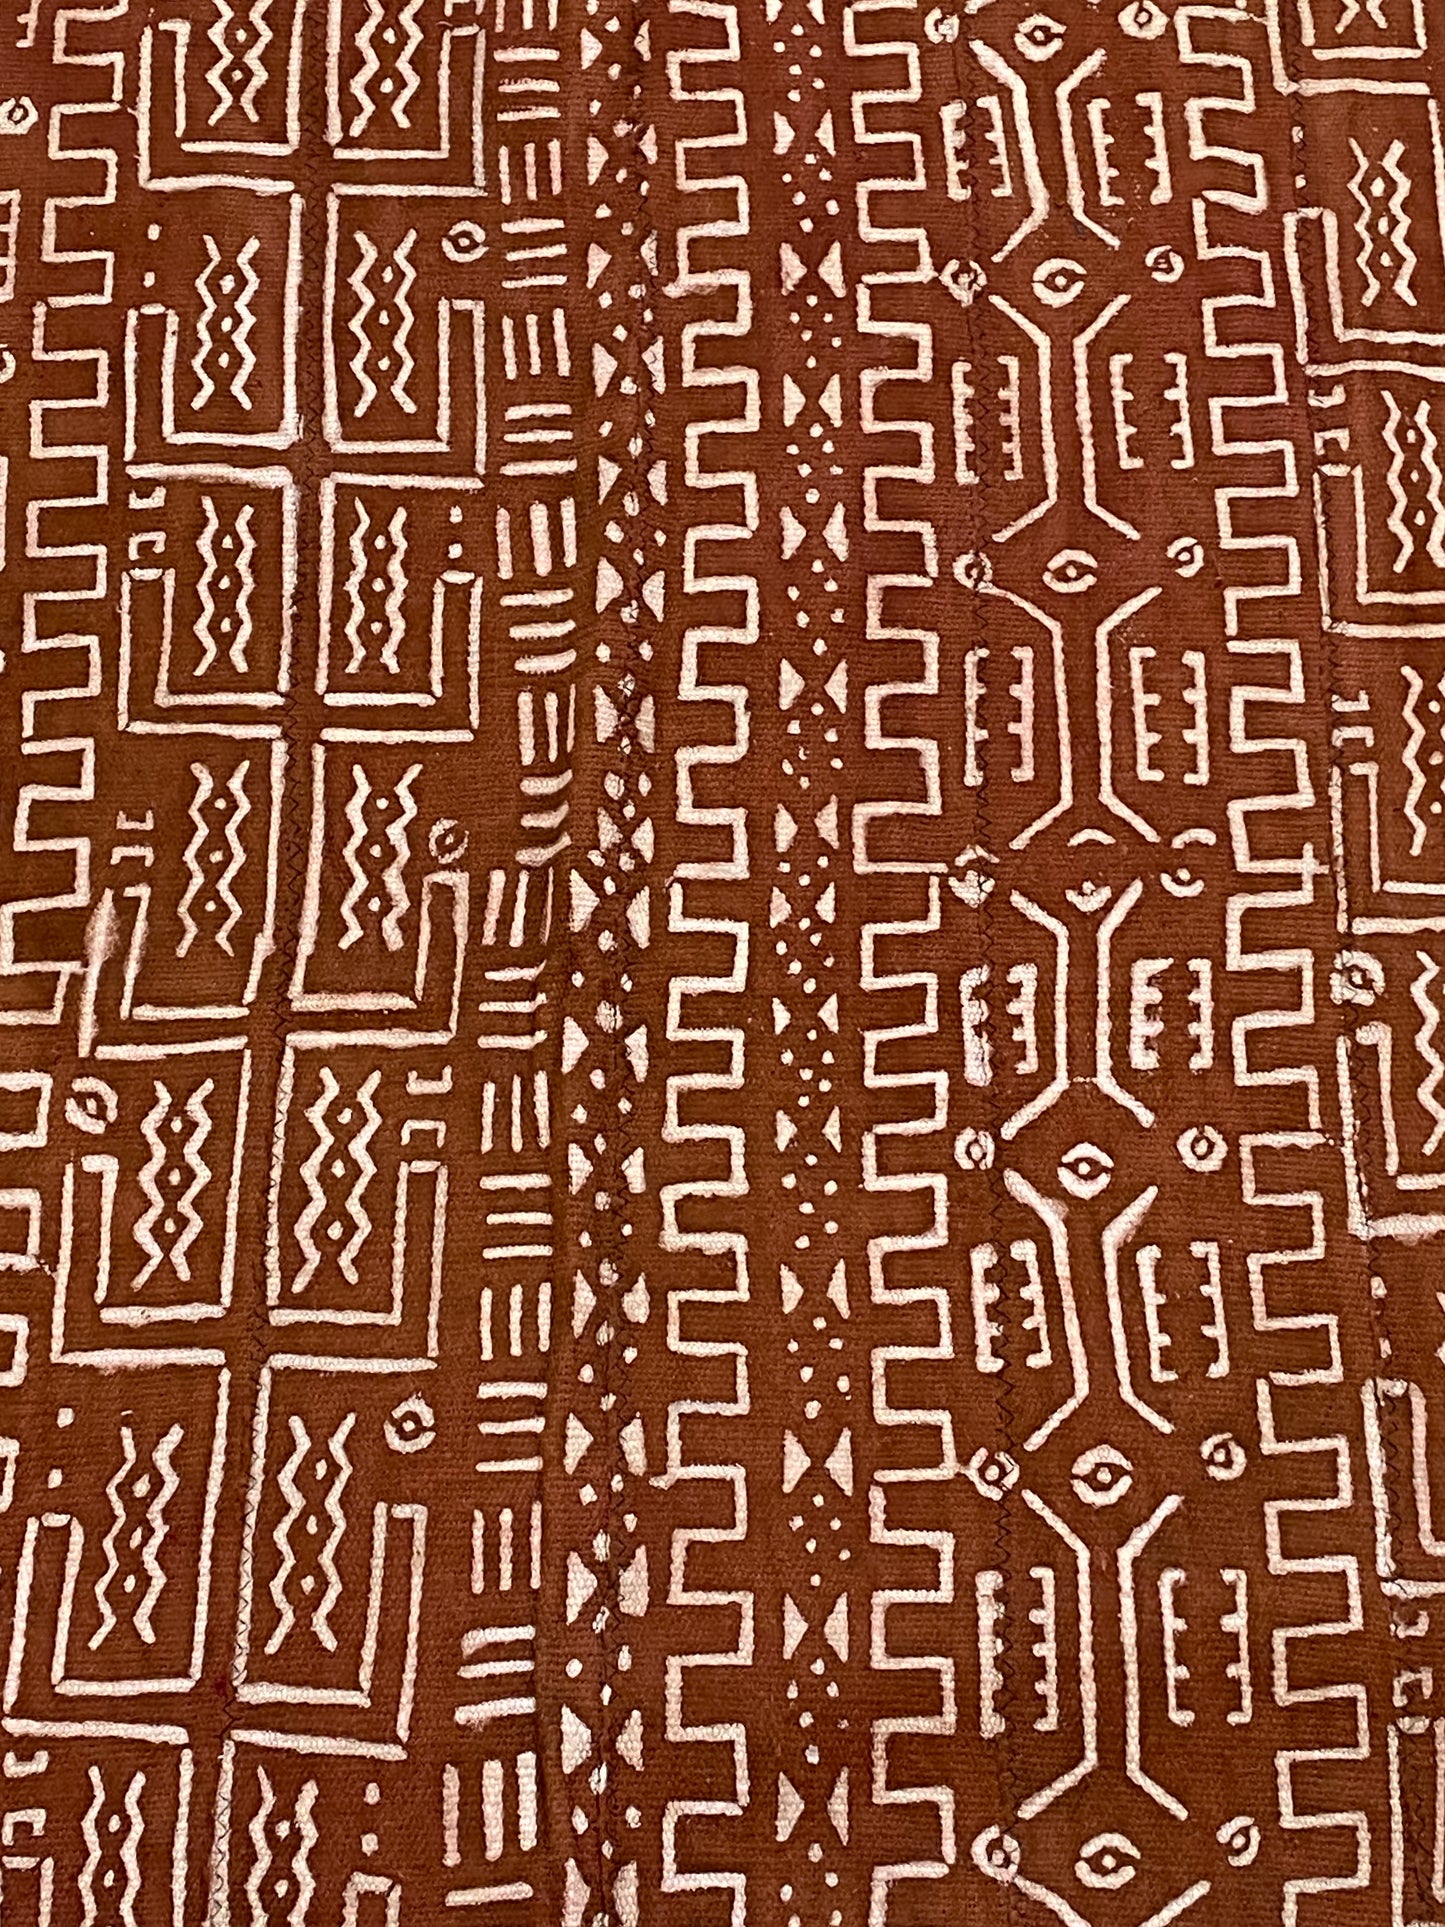 #3774 African  Brown & White Mud Cloth Textile Mali 38" by 65"